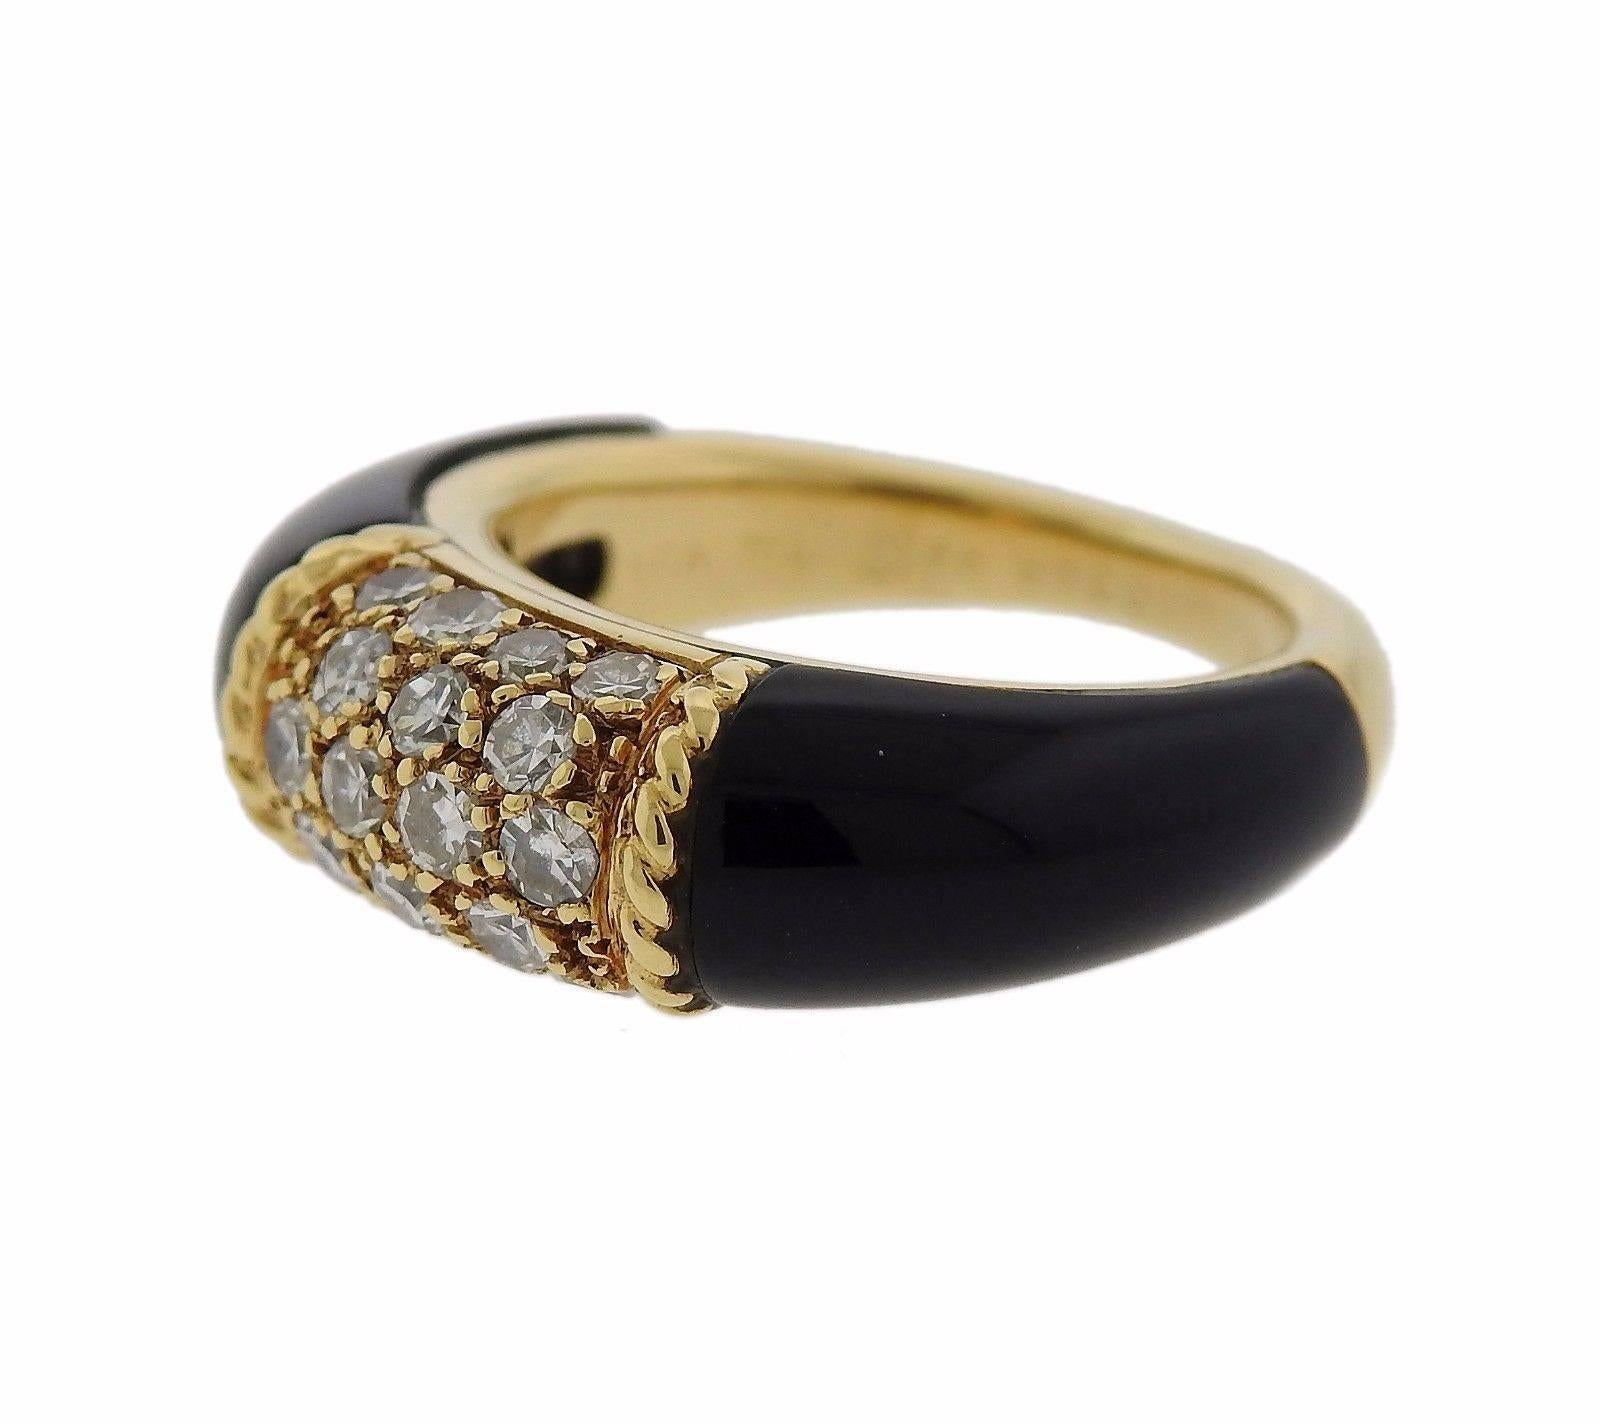 An 18k gold ring set with onyx and approximately 0.42ctw of F-G/VS diamonds.  The ring is a size 4 and is 6.6mm wide.  Marked:	VCA, 750, 68 B3001, x528.  The weight of the ring is 6.3 grams.